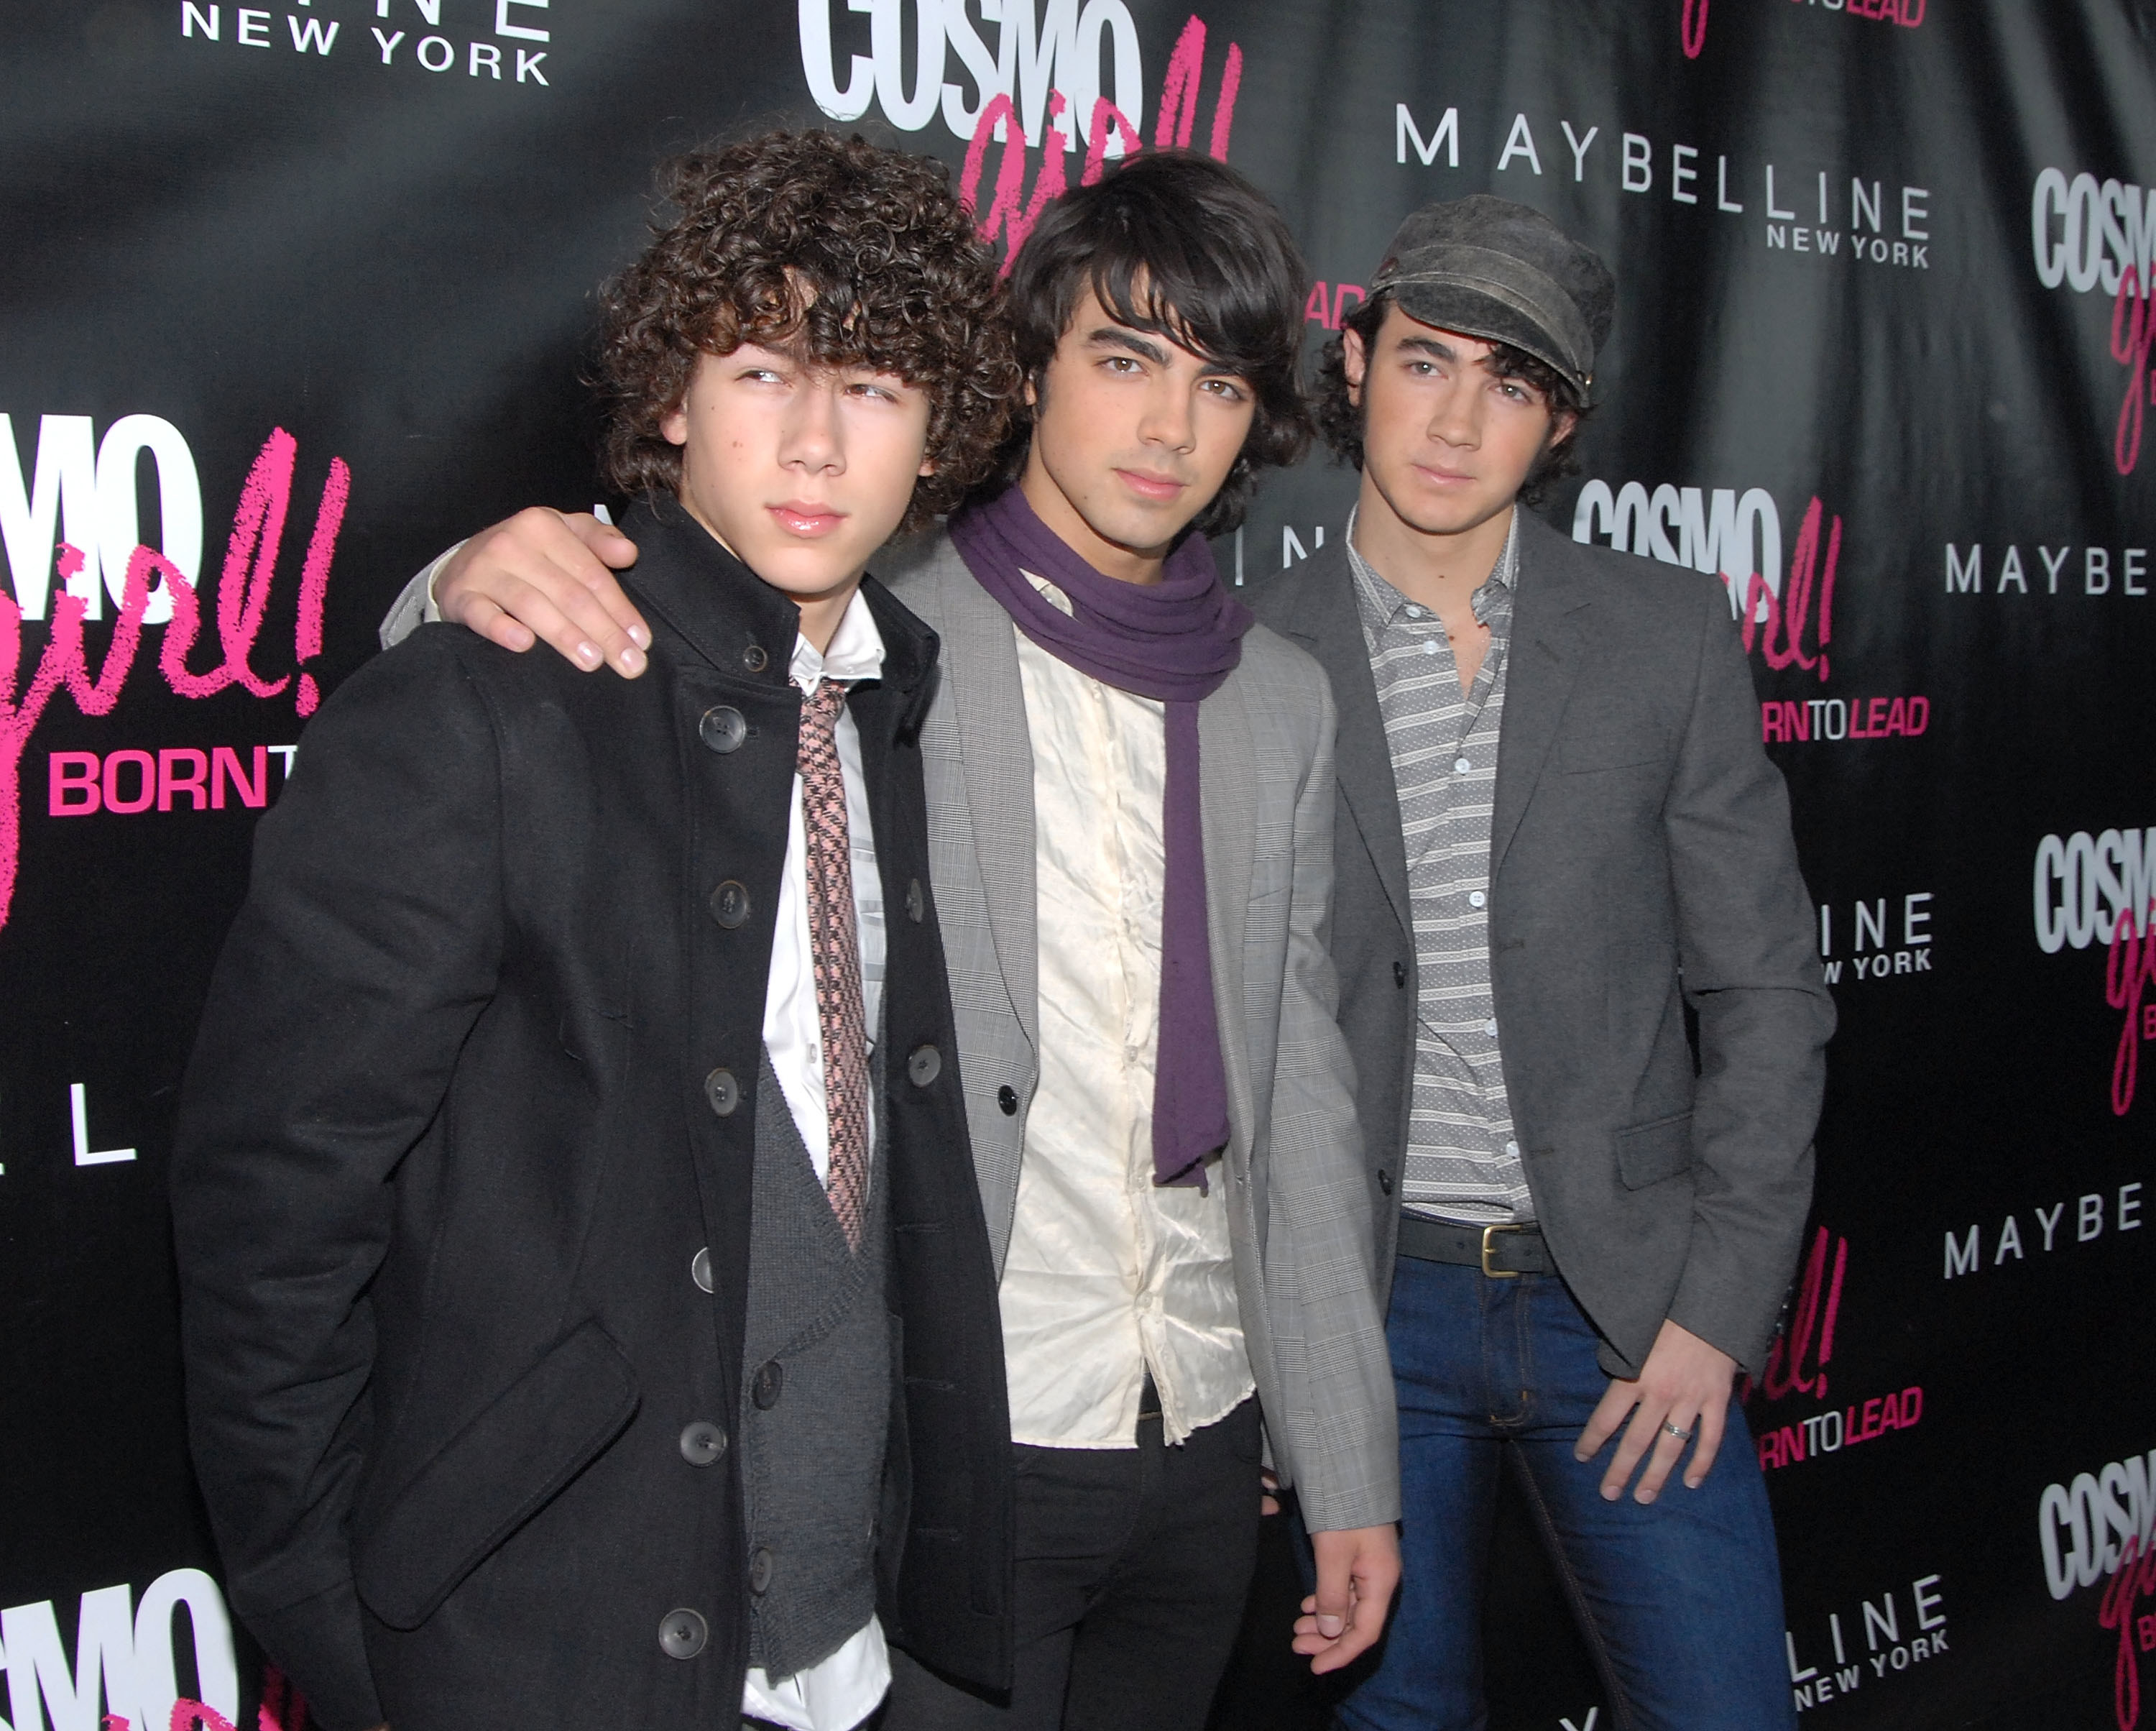 Nick (in black coat and tie), Joe (in a ivory silk shirt, grey jacket, and purple scarf), and Kevin Jonas (in a grey jacket, grey stripped shirt, and old fashion hat) on the red carpet of a CosmoGirl.